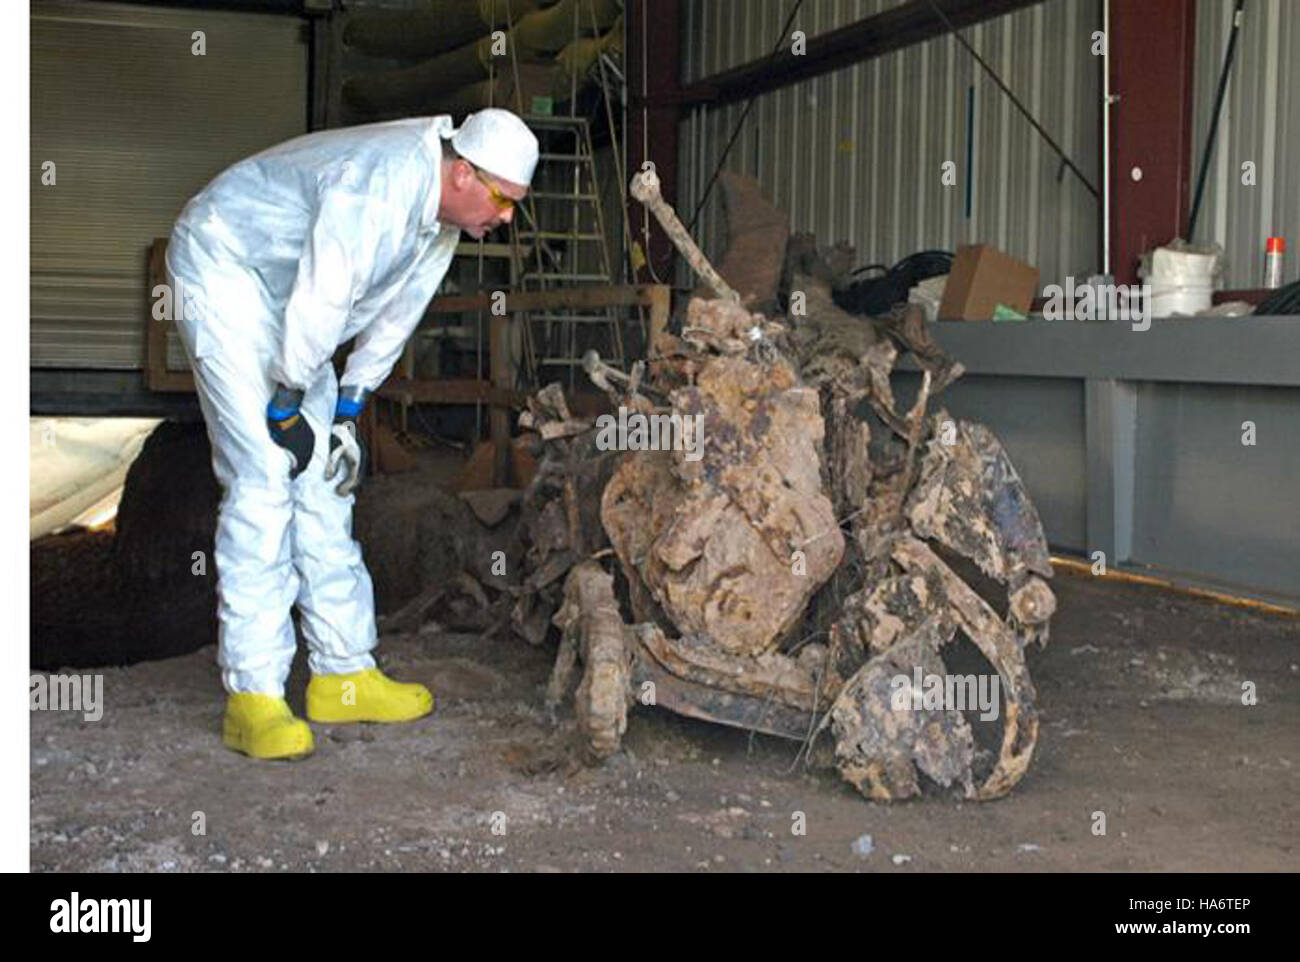 losalamosnatlab 7508999916 Manhattan Project truck unearthed at landfill cleanup site Stock Photo